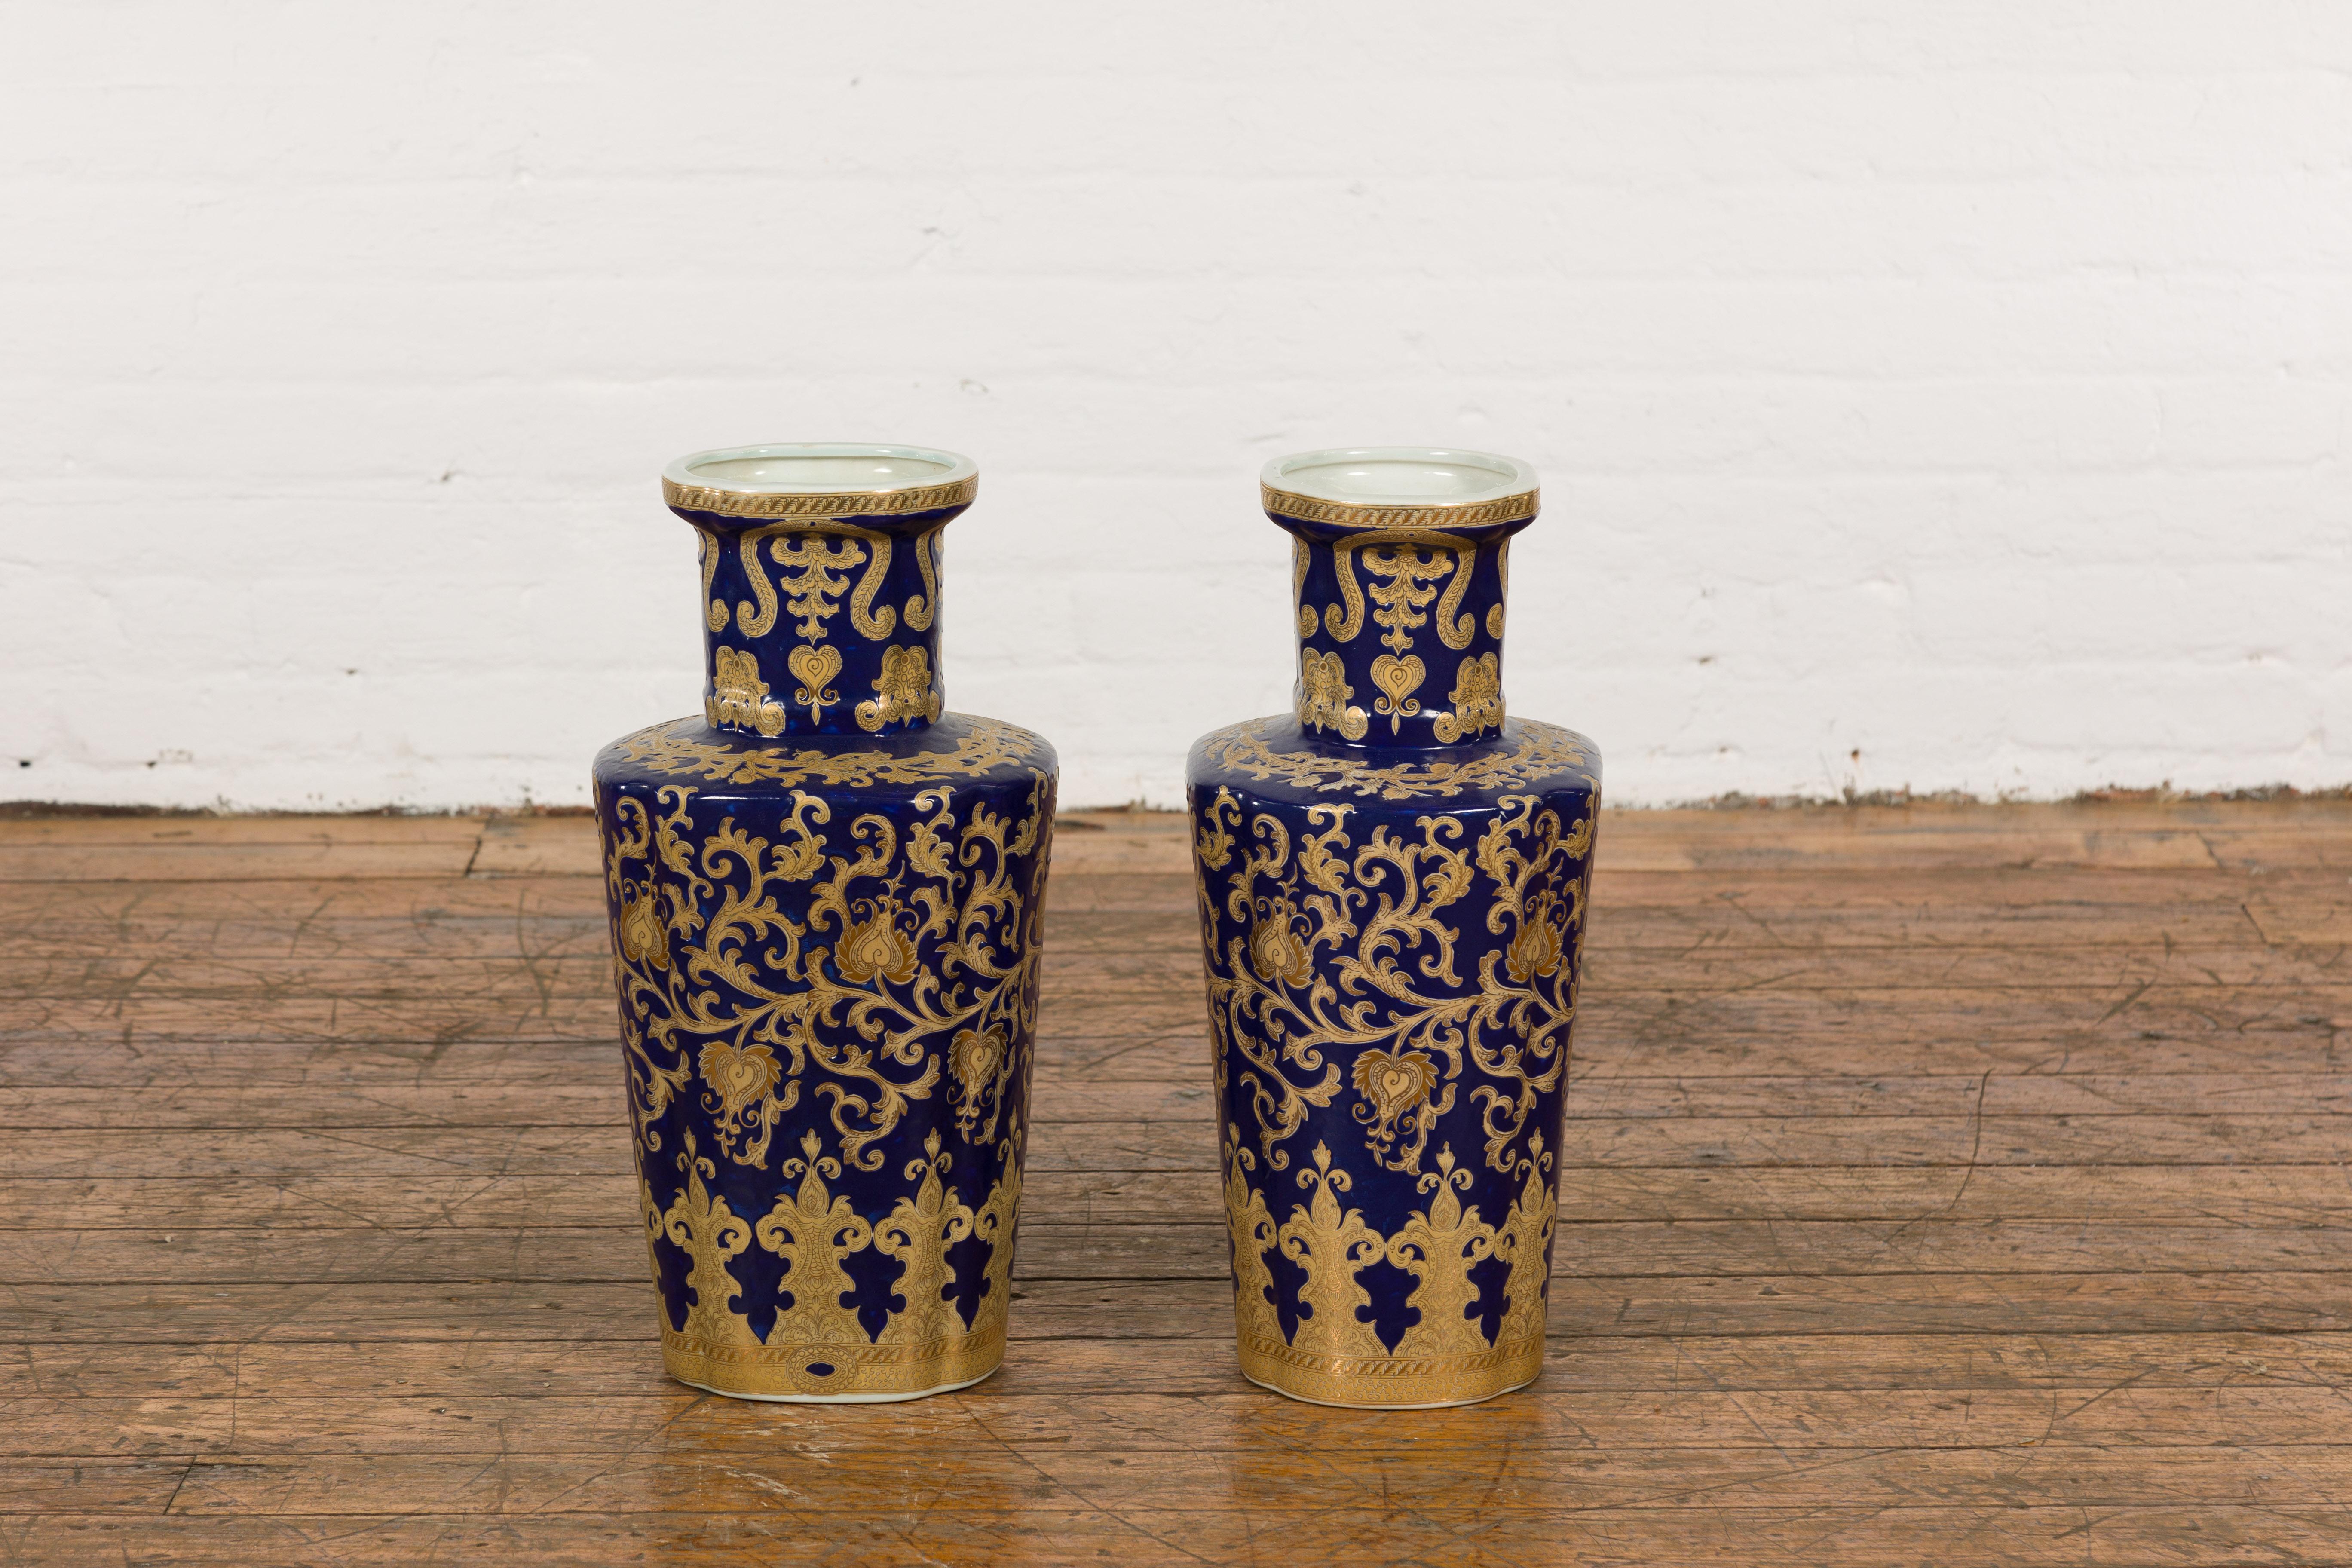 Pair of Dark Blue and Gold Vintage Vases with Intricate Design For Sale 9